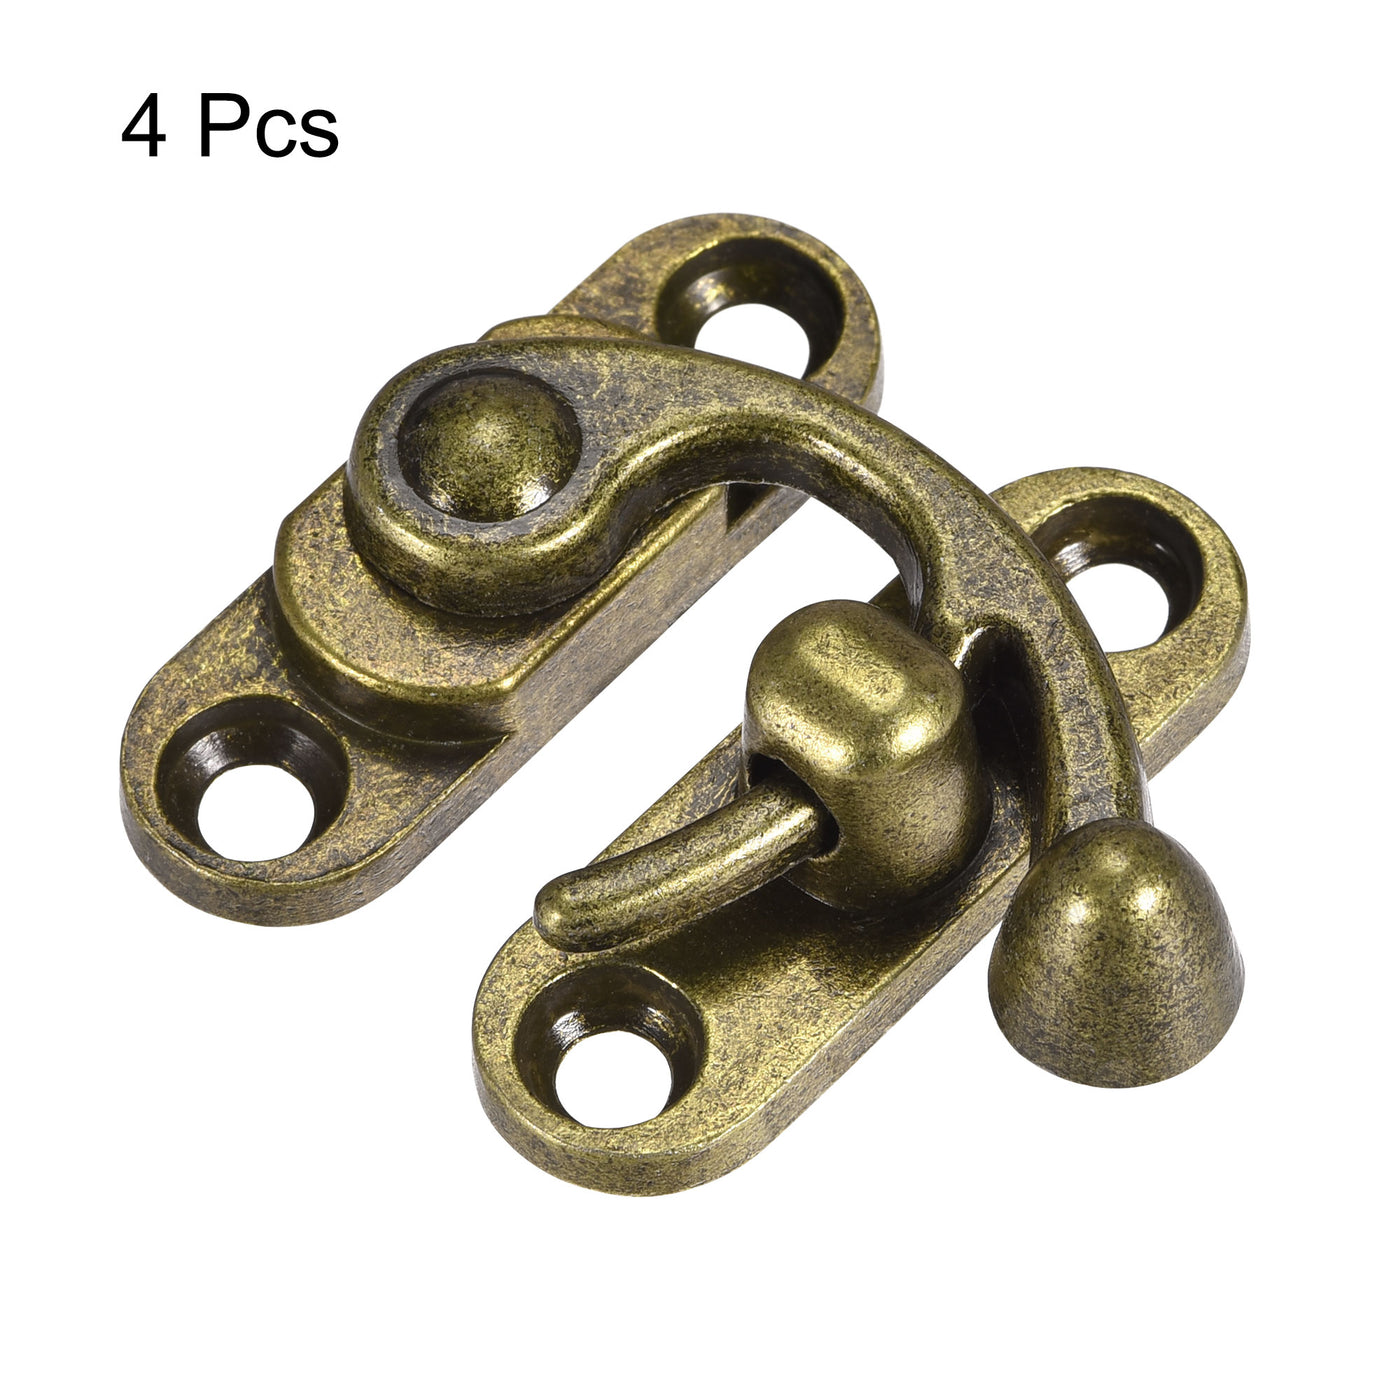 uxcell Uxcell Antique Vintage Lock Clasp Right Latch Hook Hasp 45mmx39mm Swing Arm Latch Bronze Tone 4 Pcs